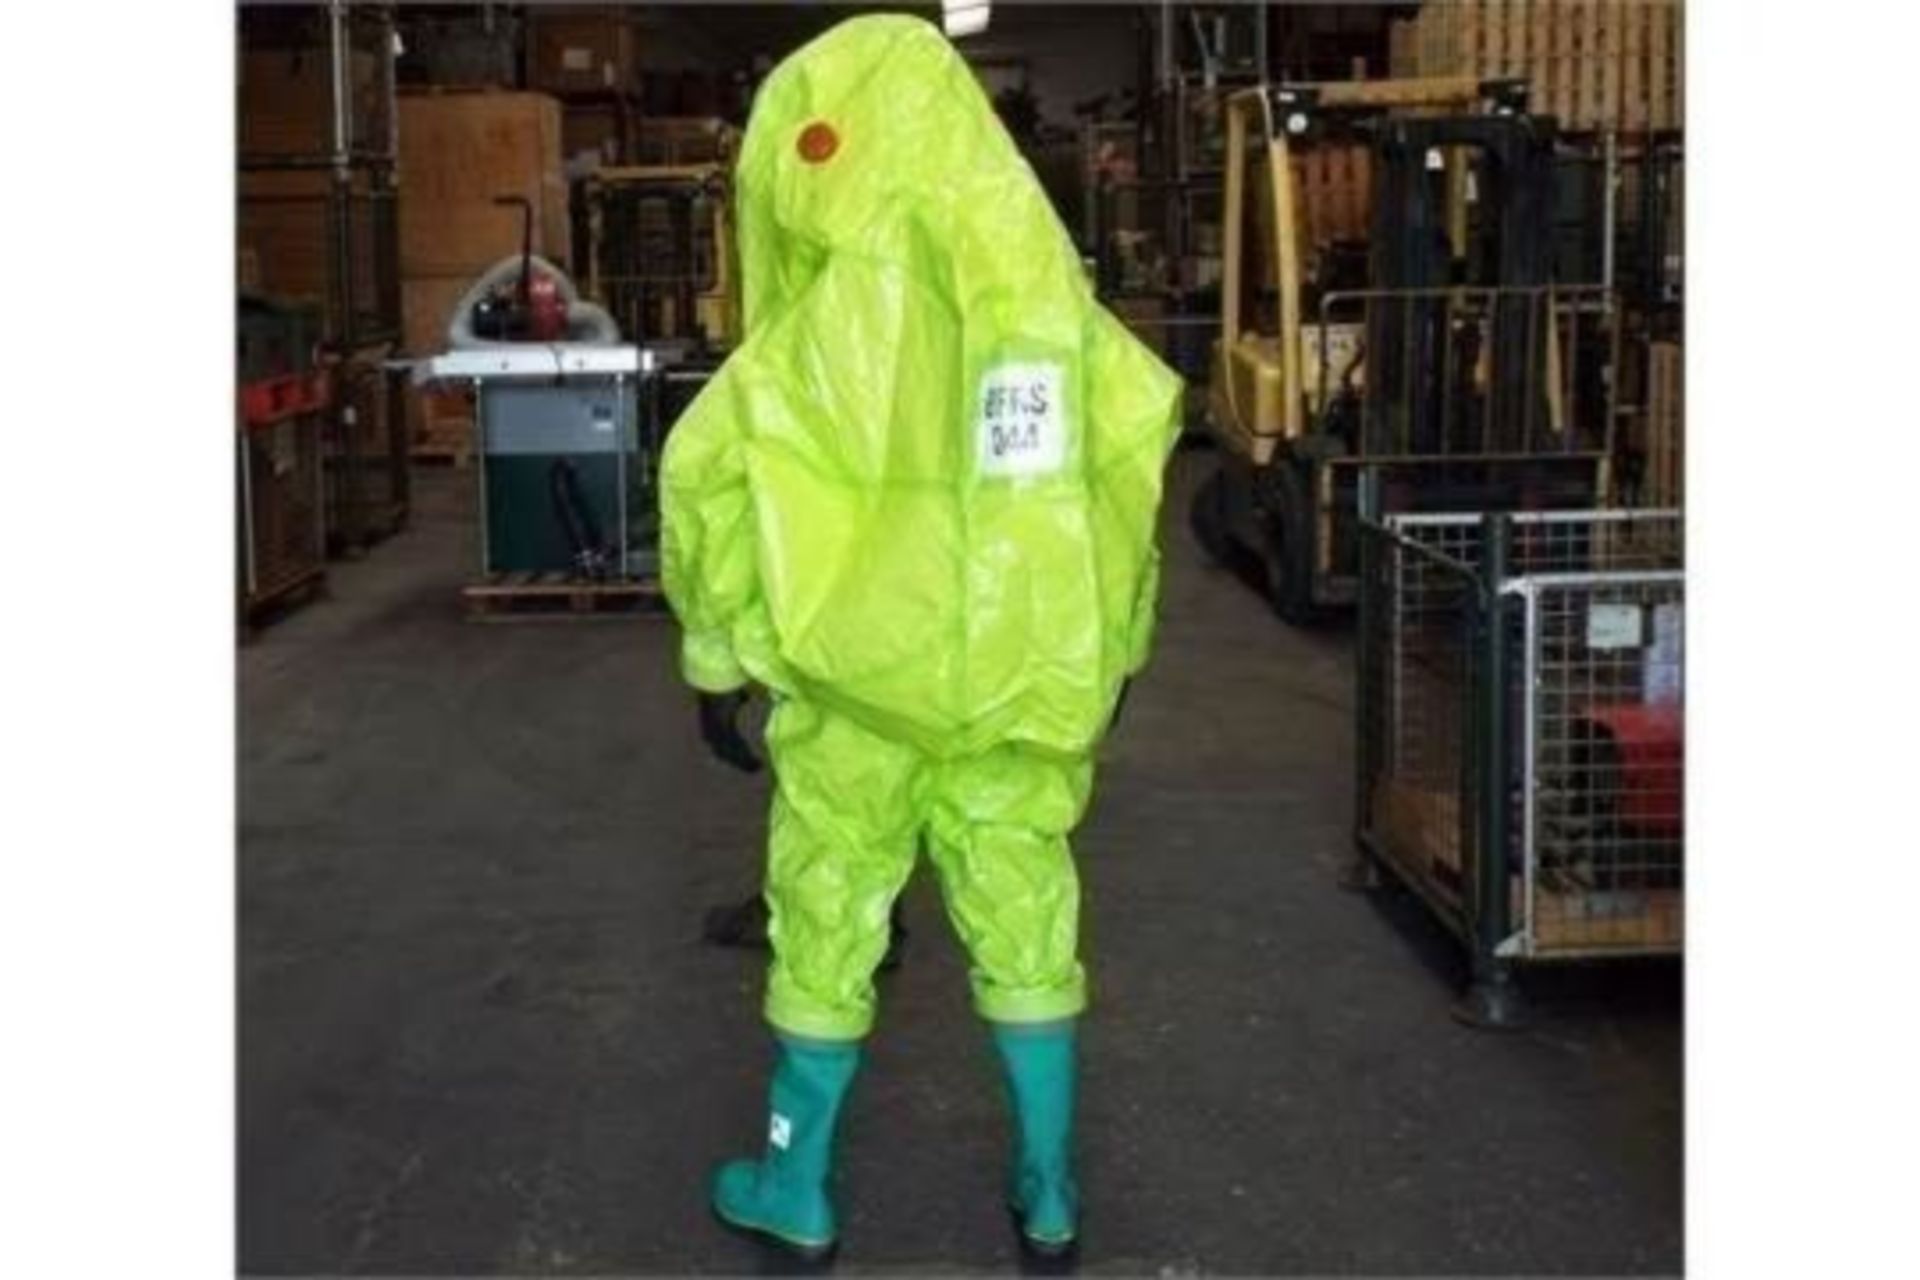 0 x Respirex Tychem TK Gas-Tight Hazmat Suit Type 1A with Attached Boots and Gloves - Image 3 of 10